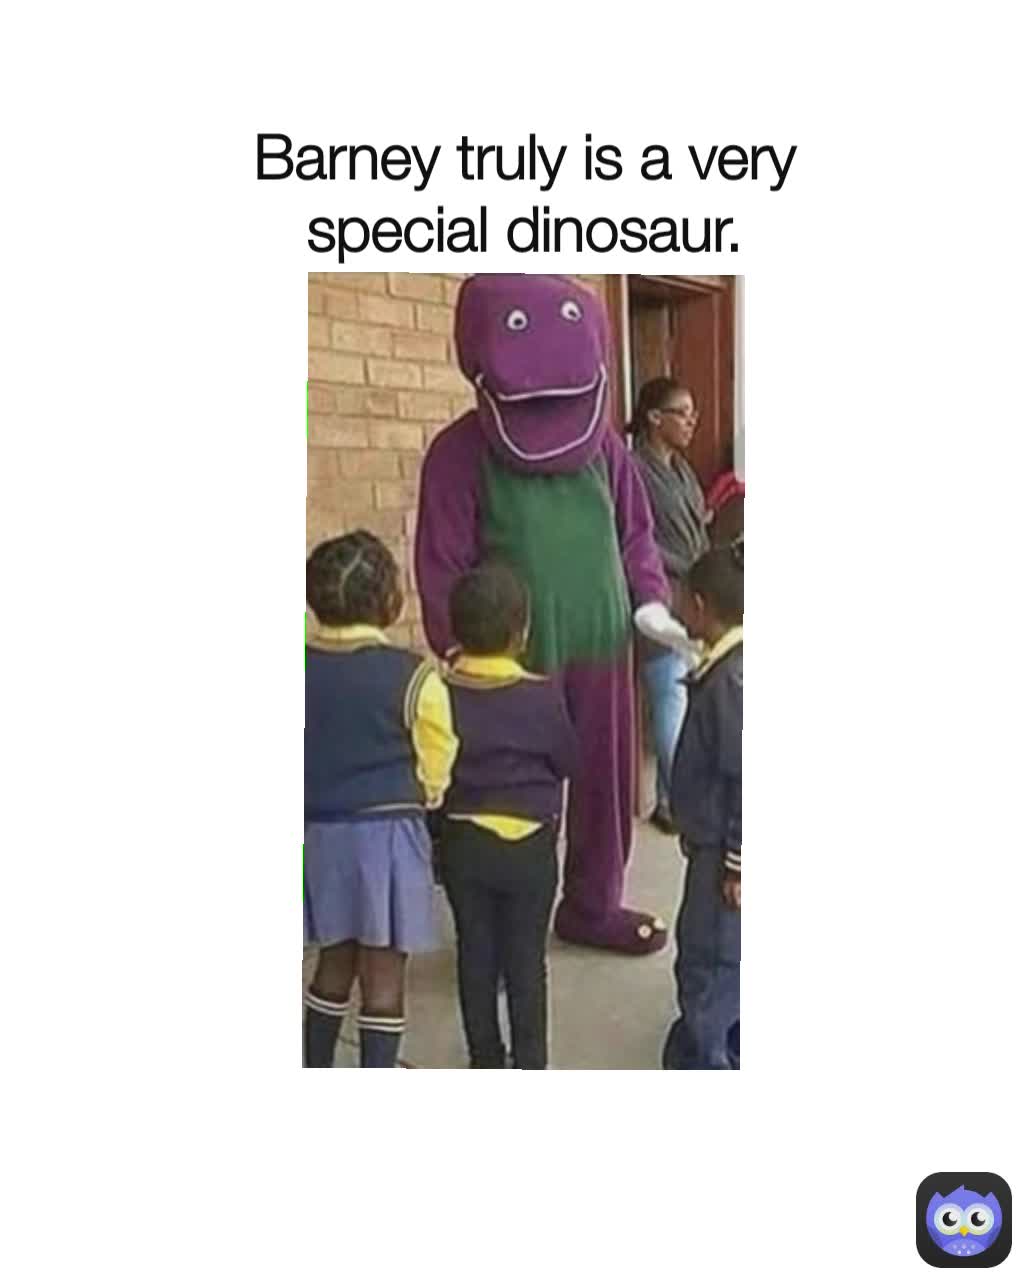 Barney truly is a very special dinosaur.